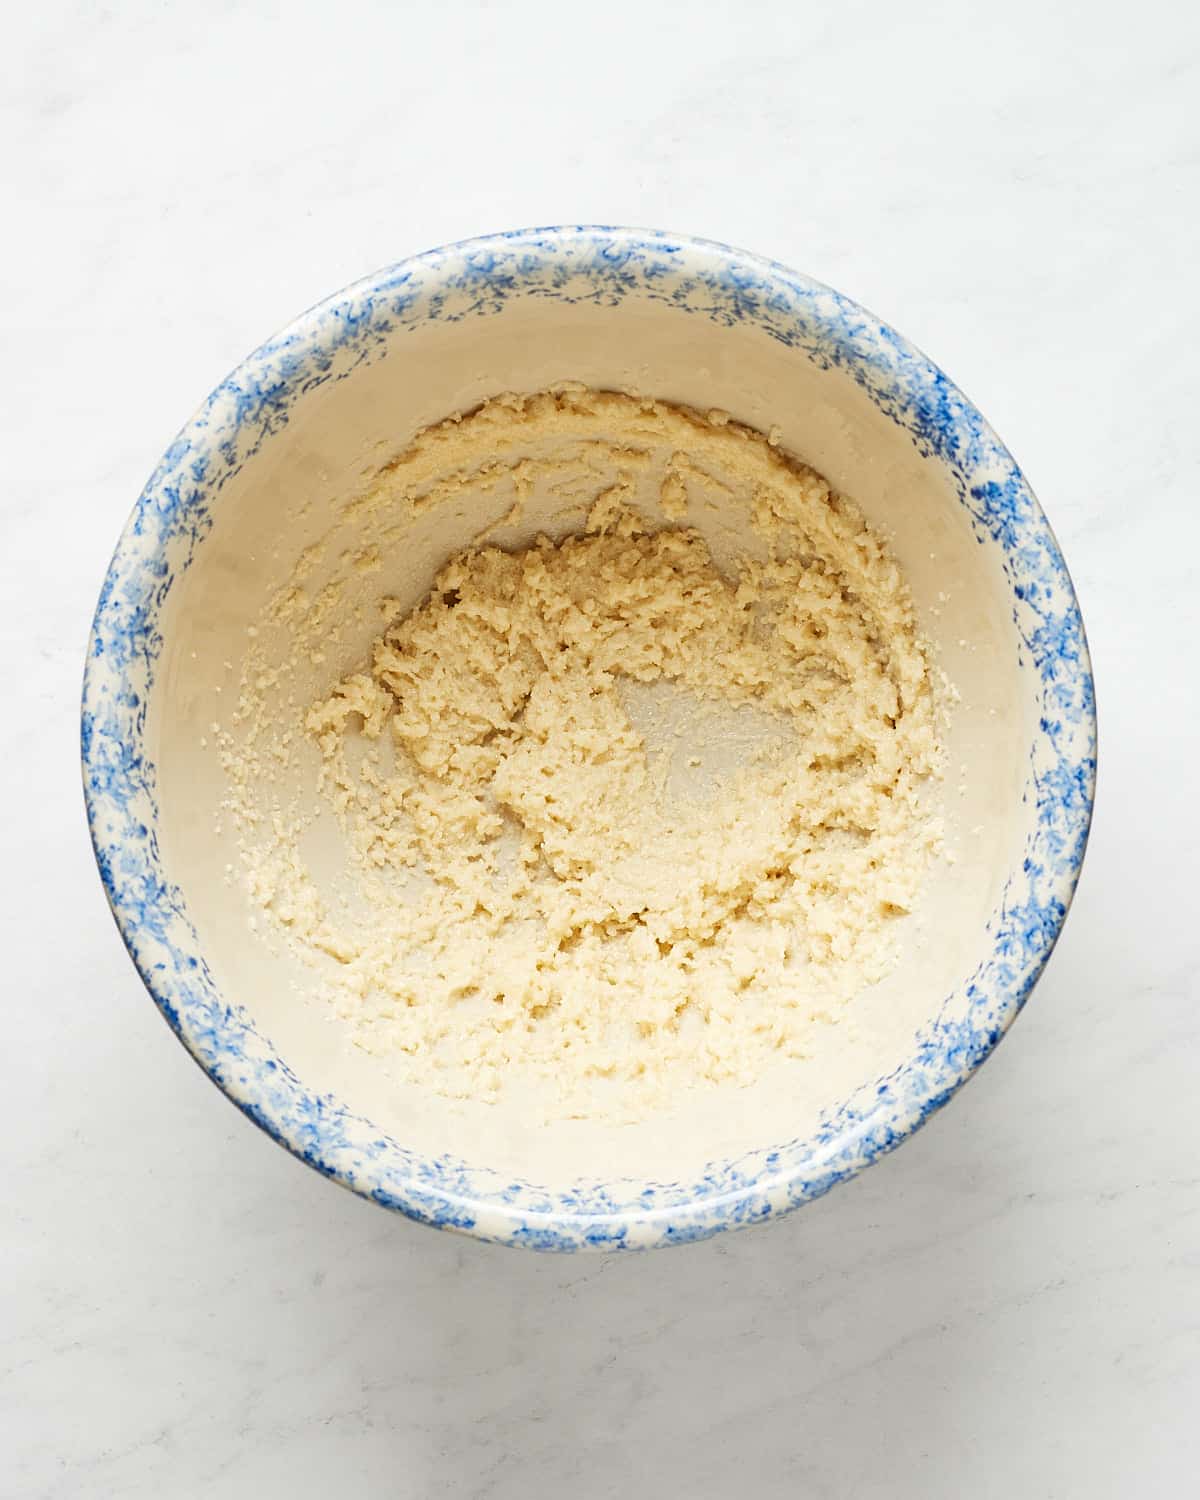 MIxing vegan butter and sugar in large bowl.